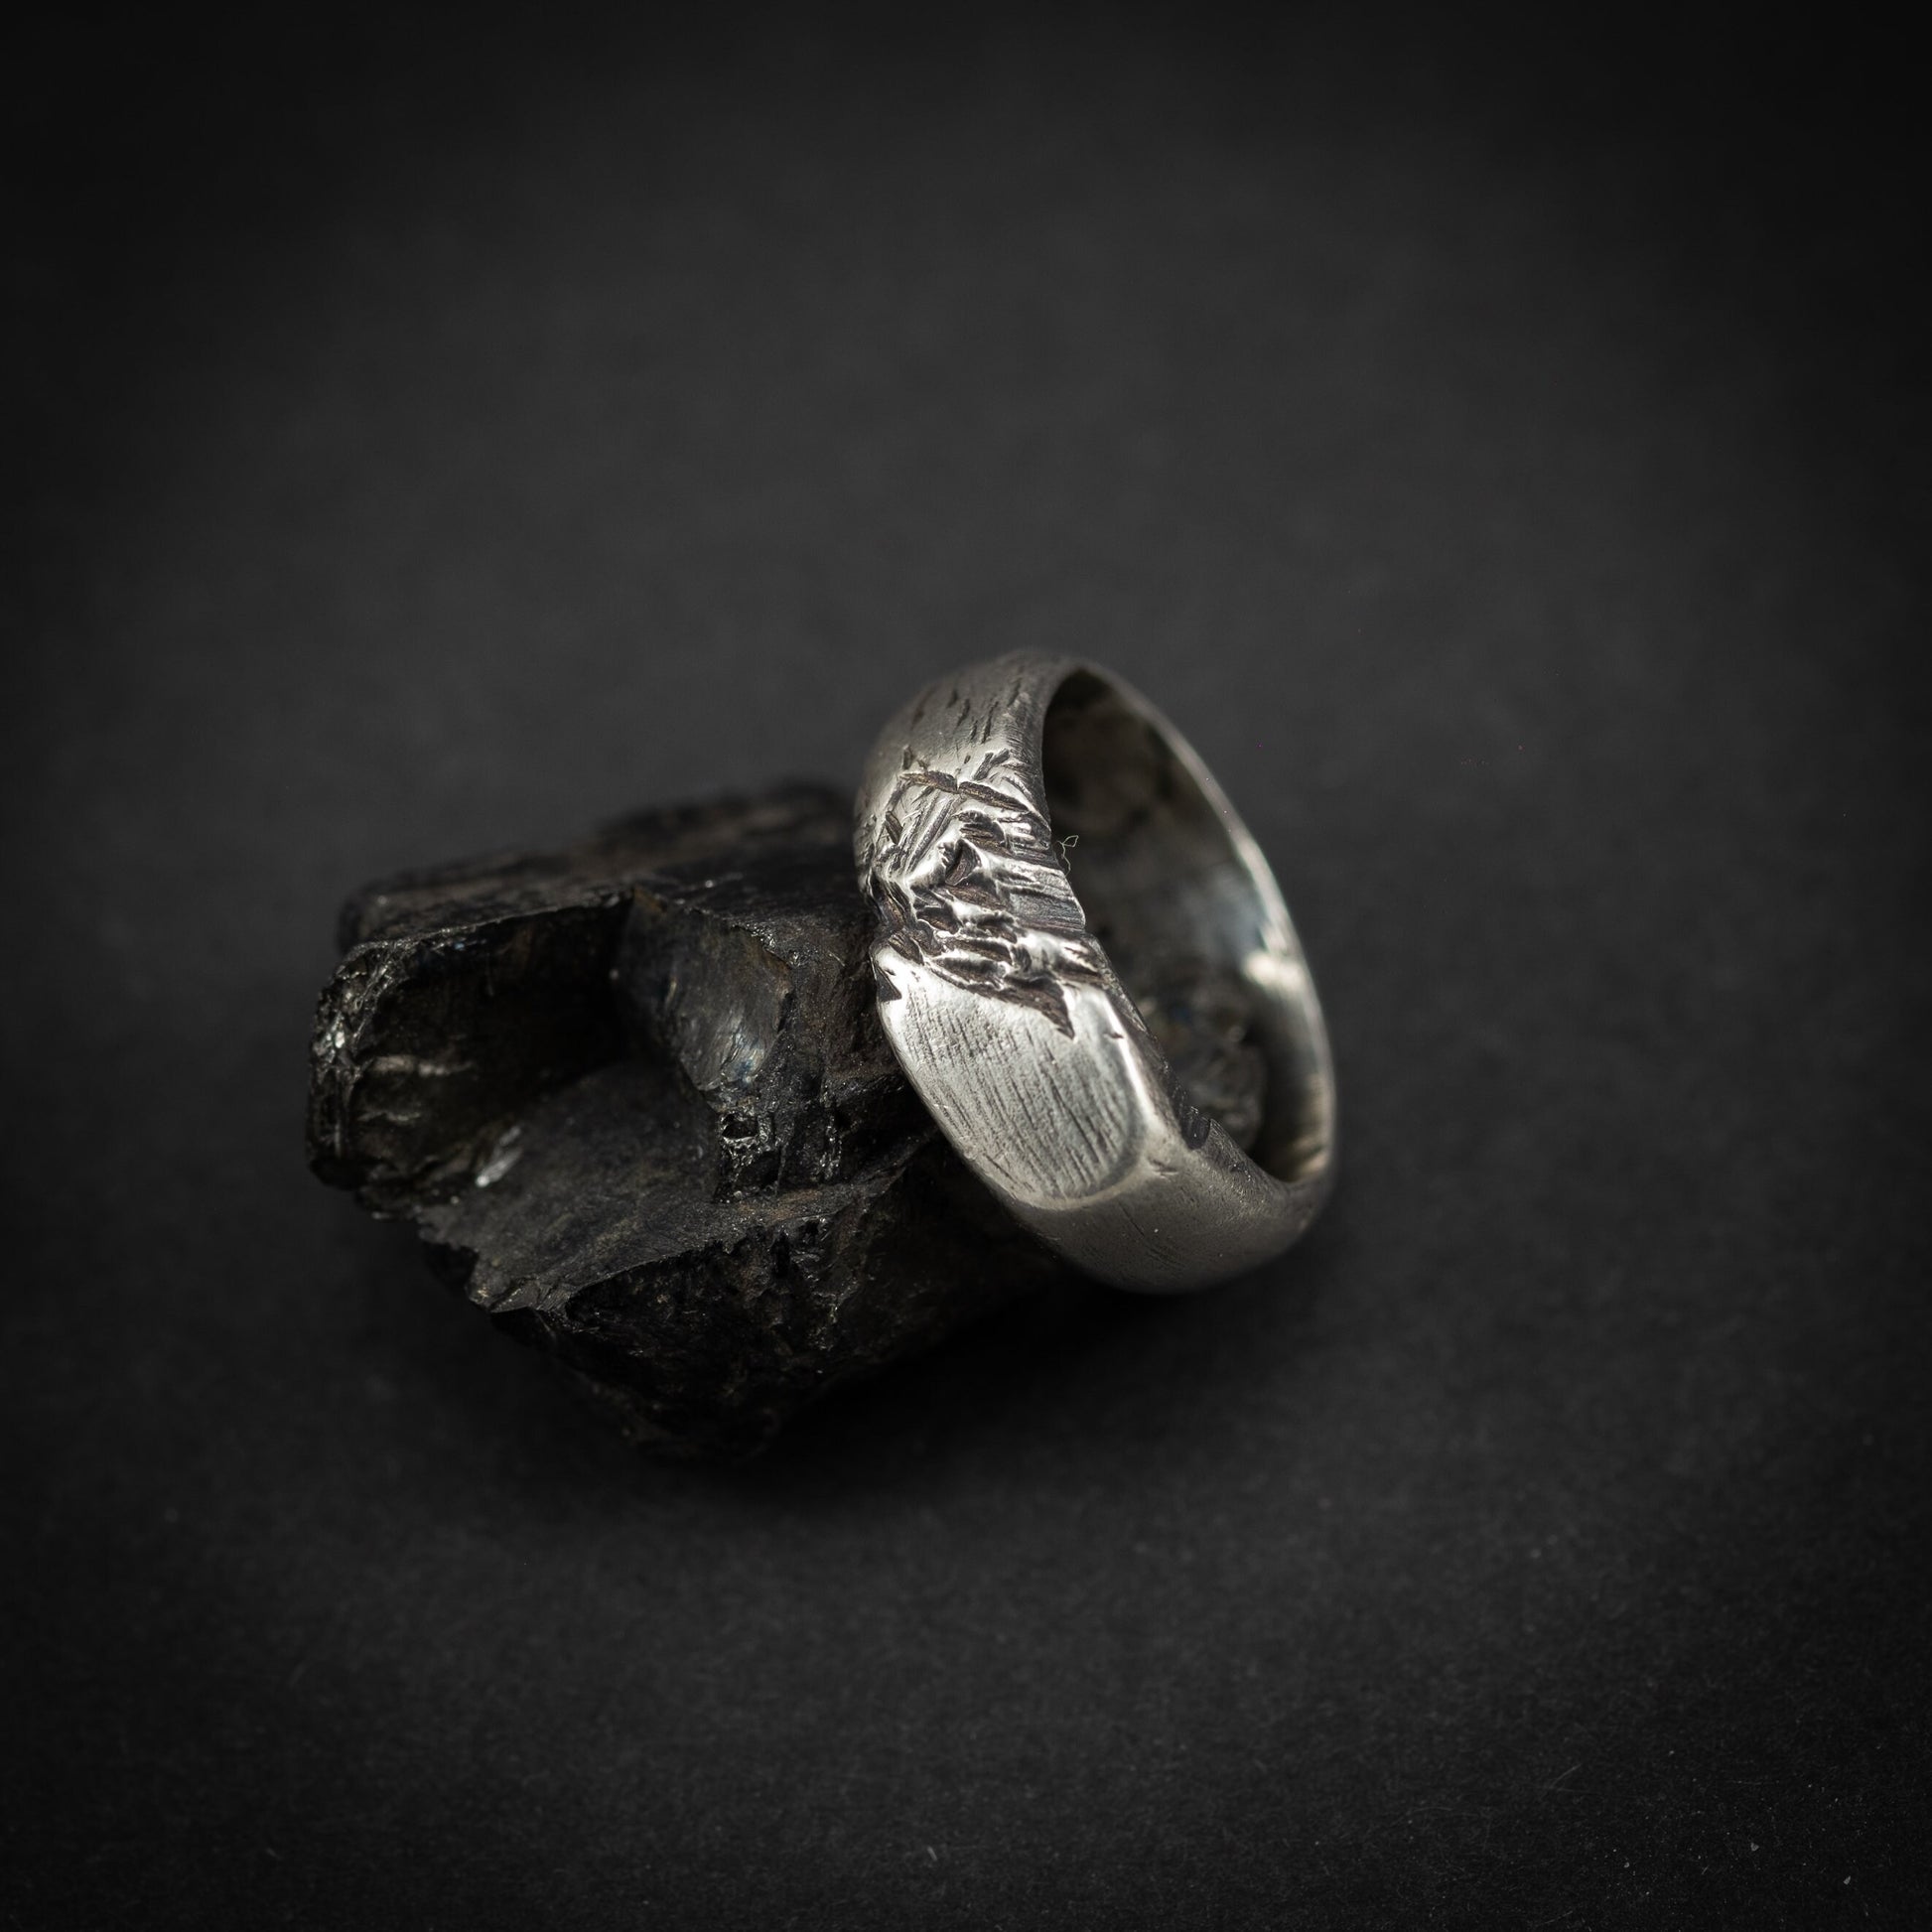 Rustic silver mens signet ring, brutalist raw oxidized ring, Handmade jewelry, Unique gift for men, husband anniversary gift